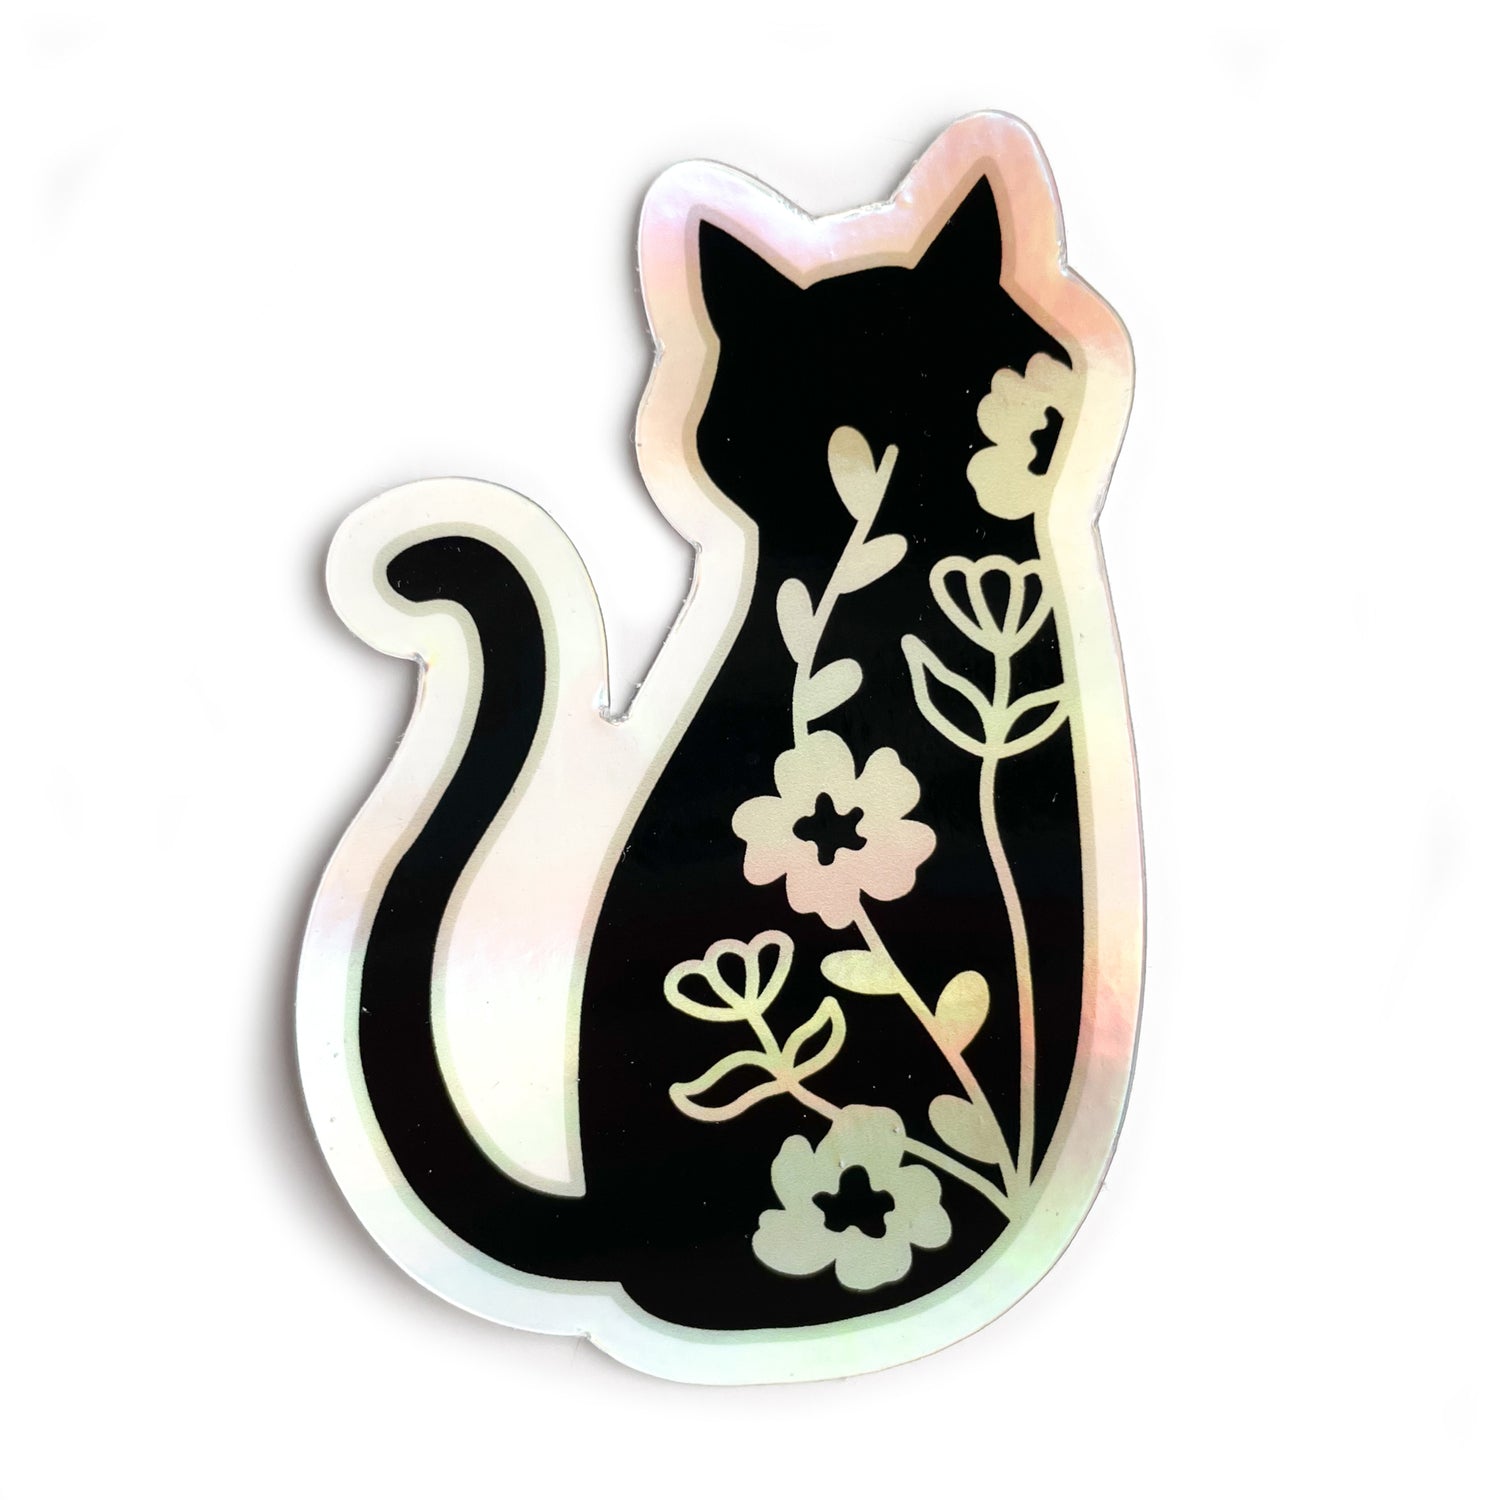 A holographic sticker in the shape of a silhouette of a black cat. There are floral vines along the back of the cat.